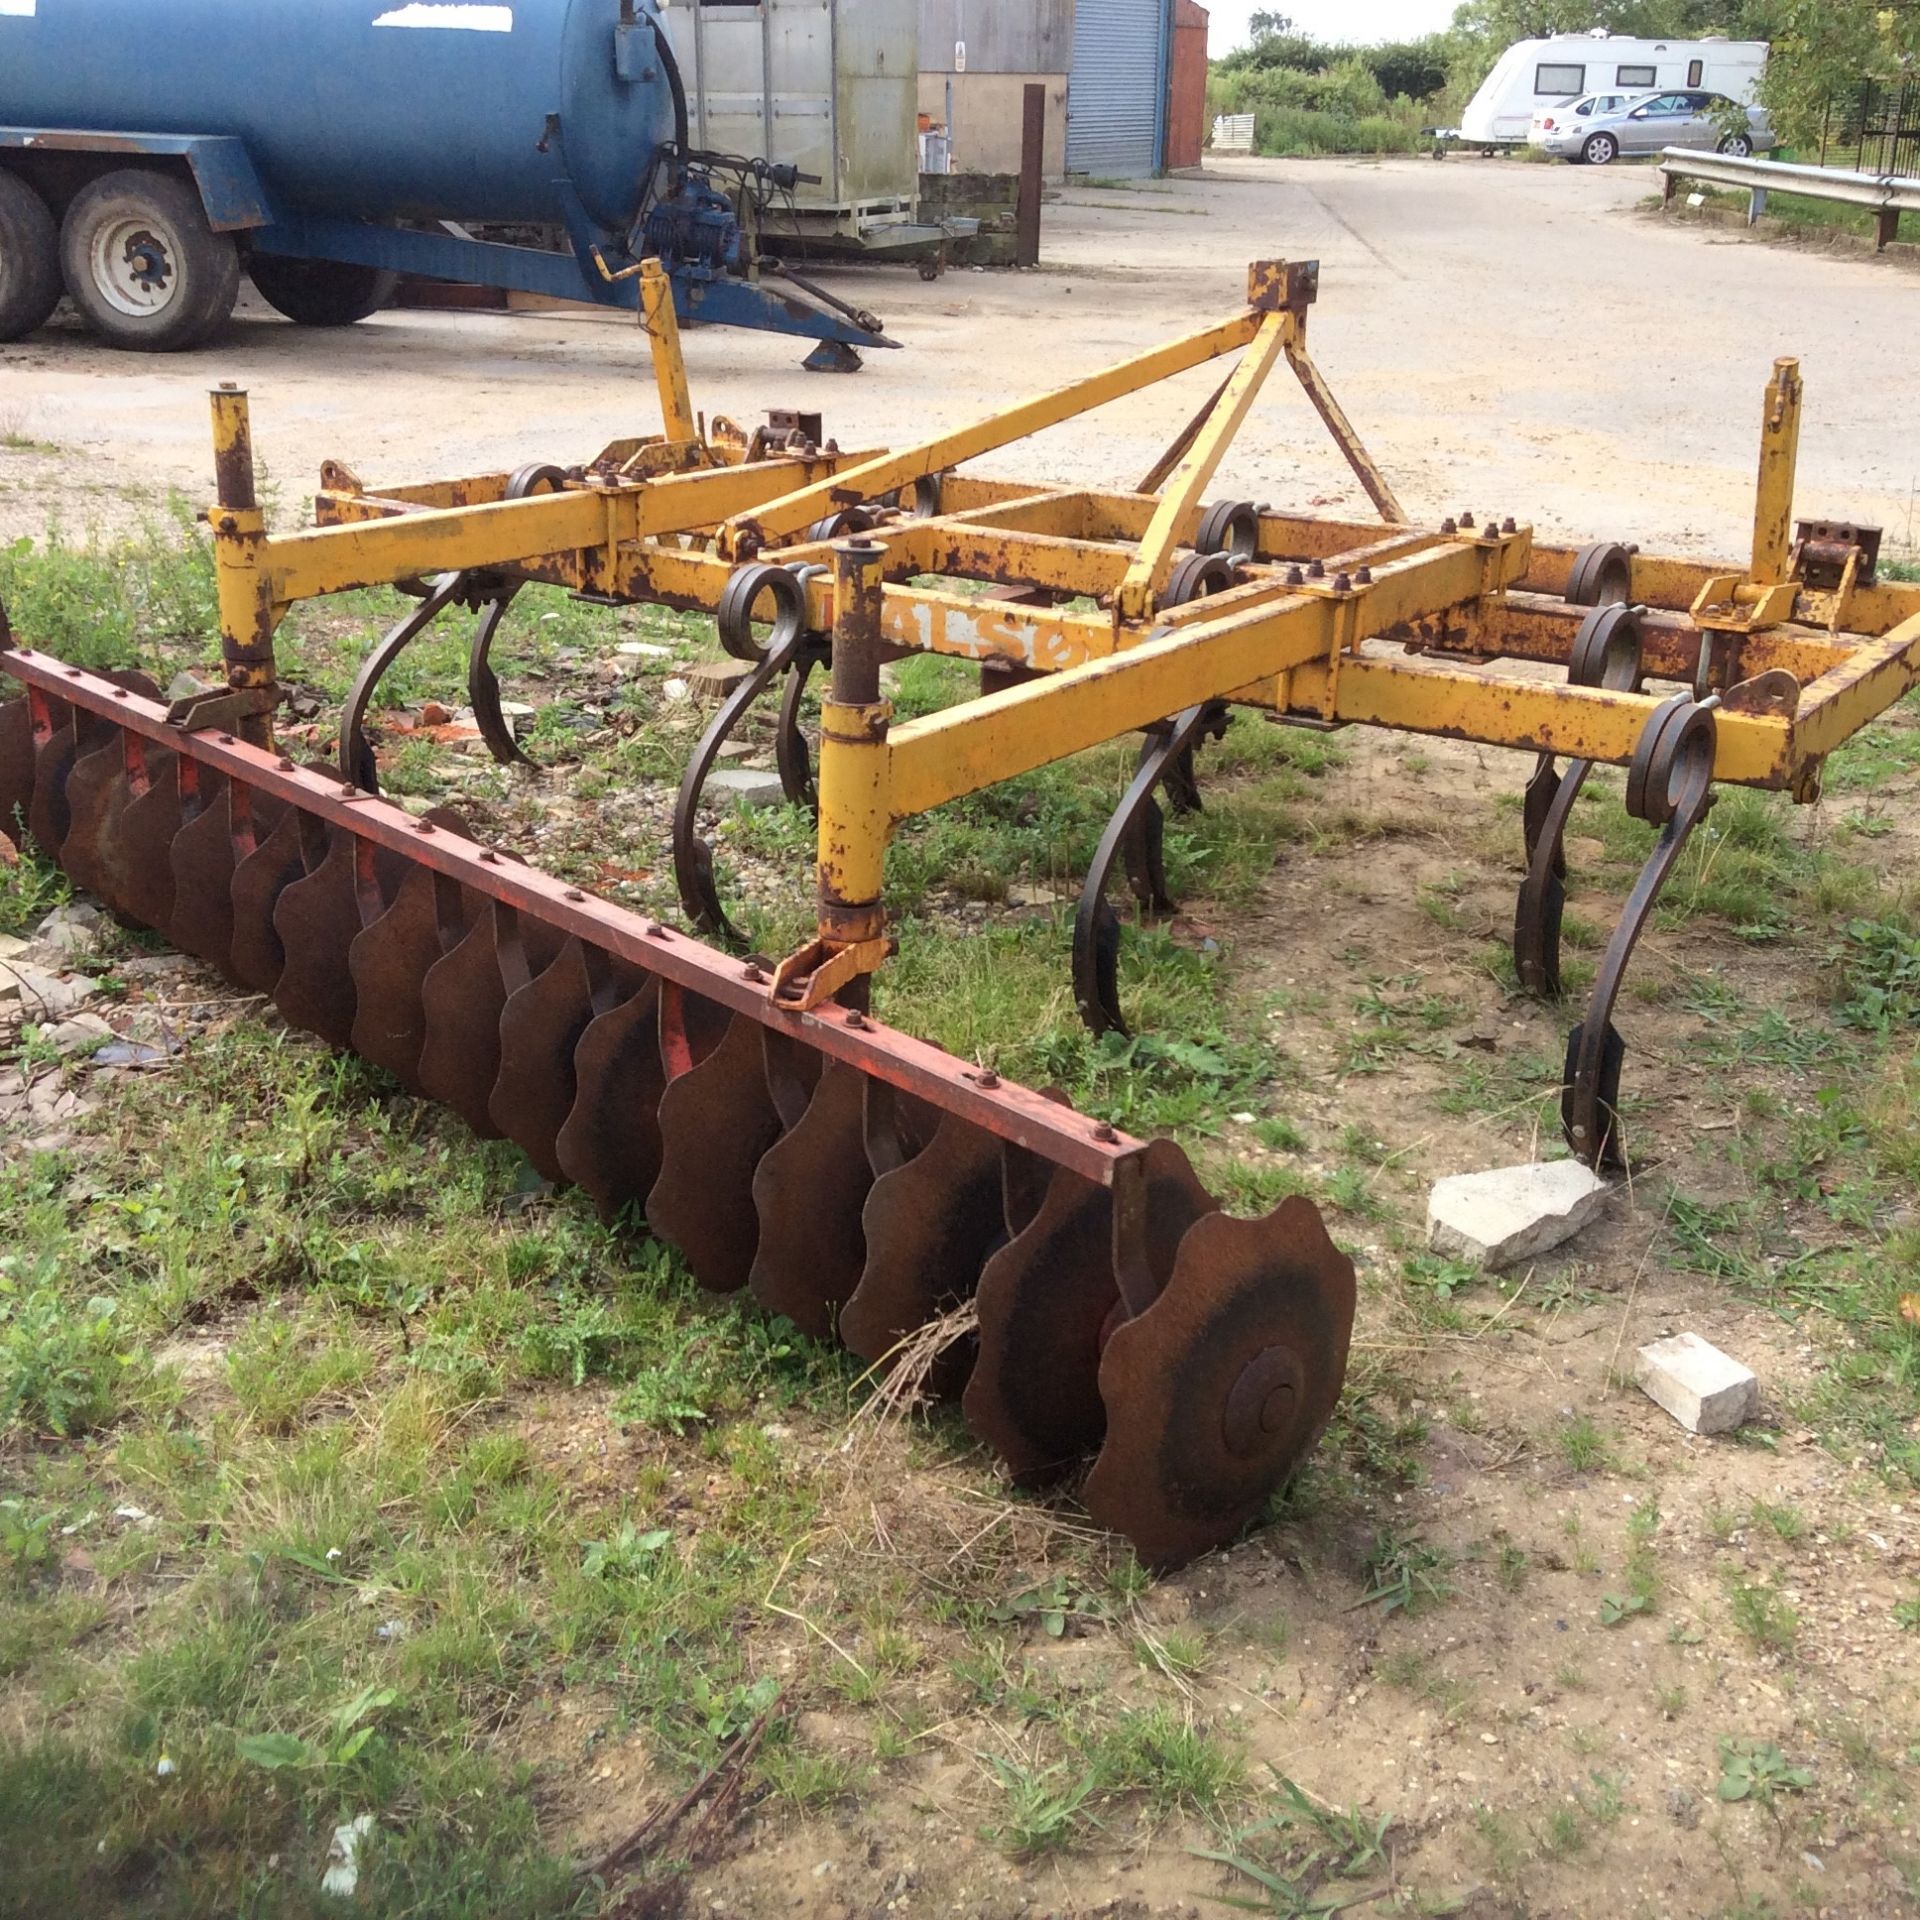 Dalso 3m Cultivator. Location Diss, Norfolk.